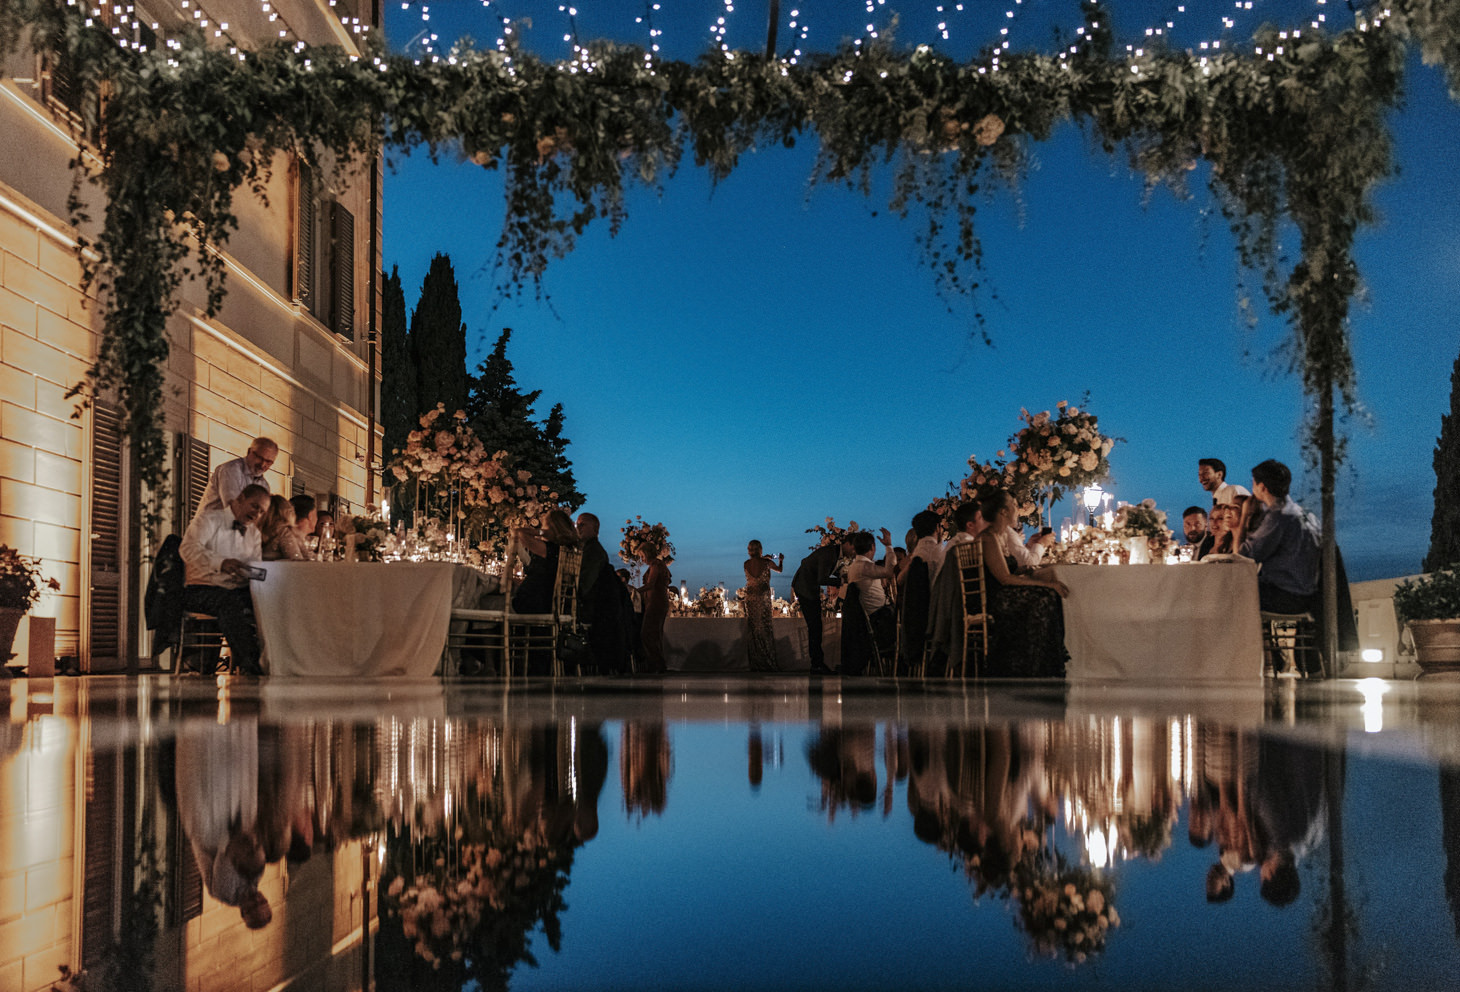 Wedding reception under the stars of Florence